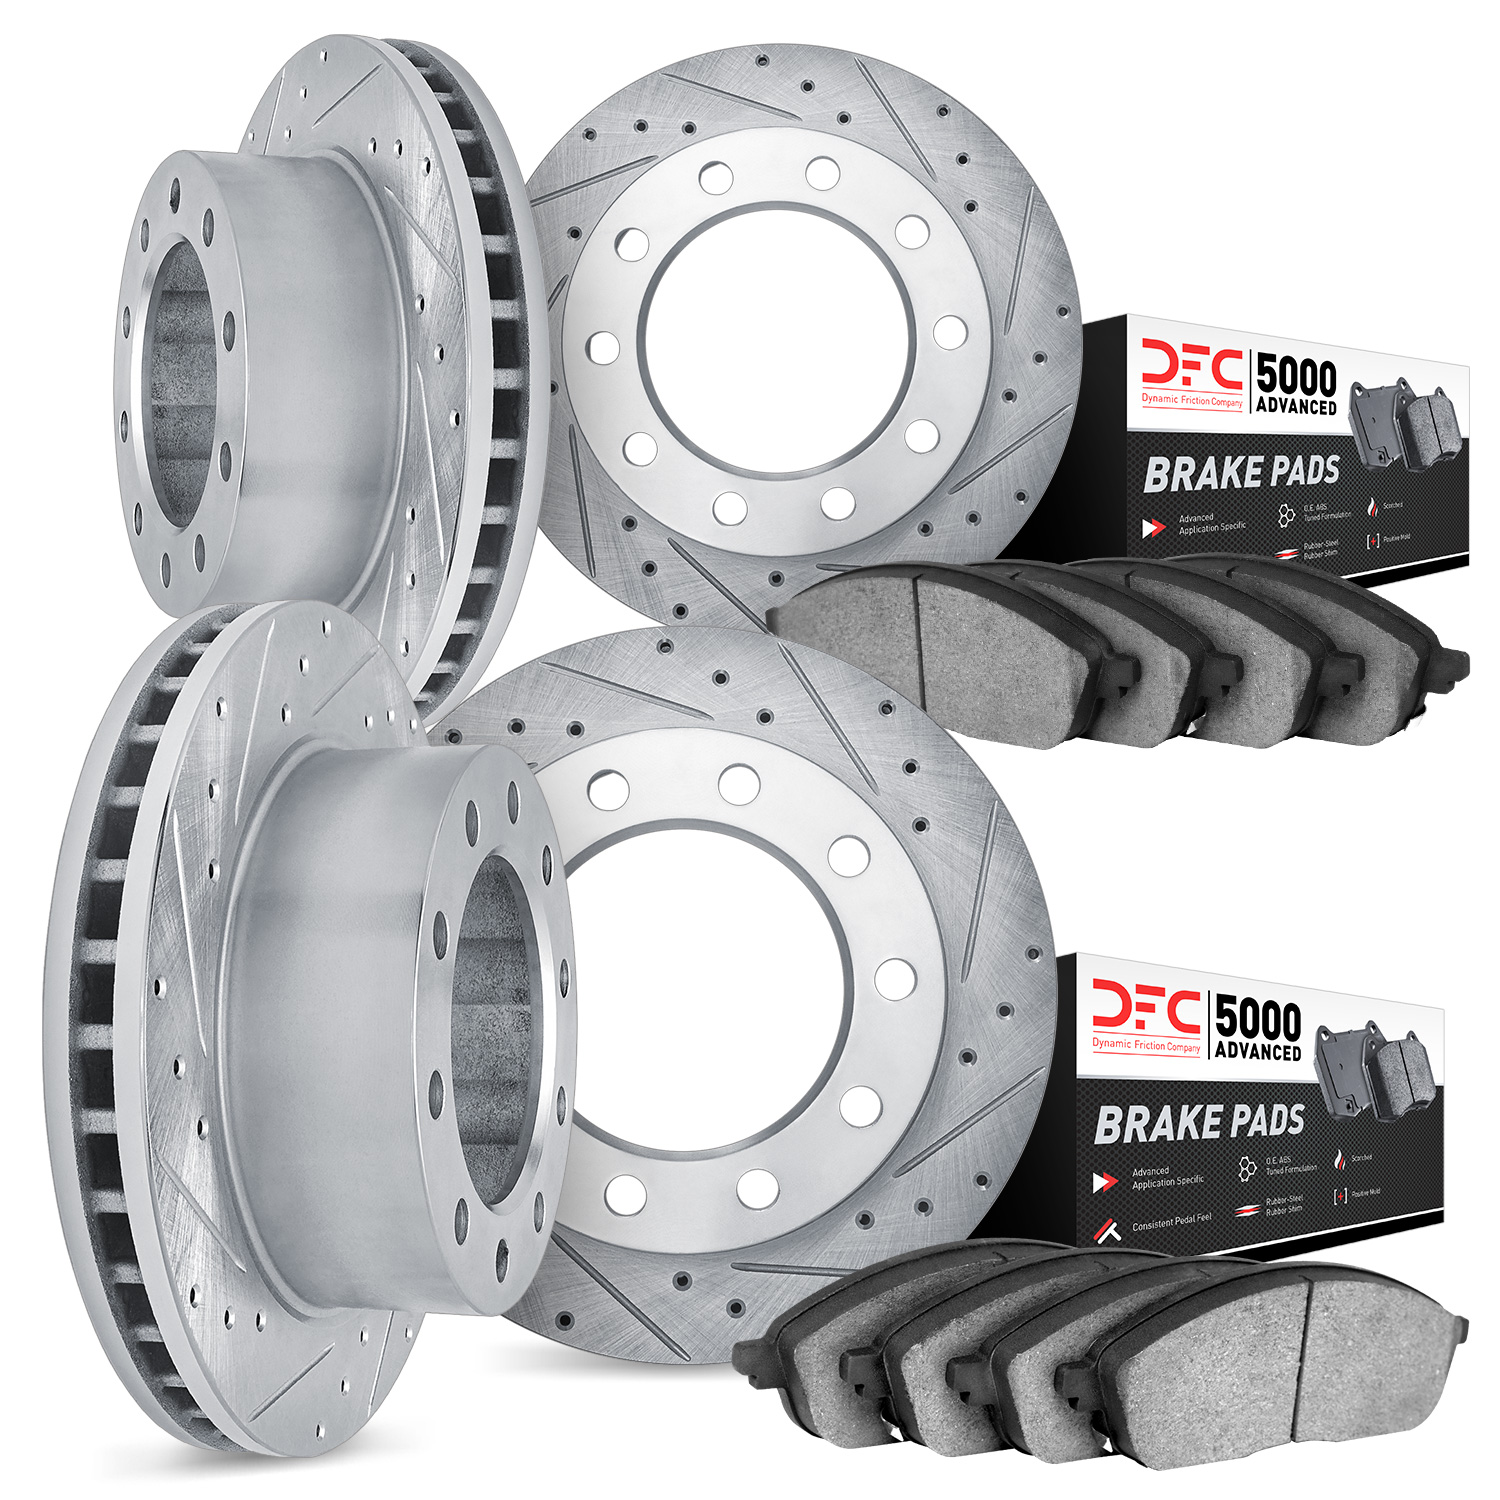 7504-48003 Drilled/Slotted Brake Rotors w/5000 Advanced Brake Pads Kit [Silver], 1998-1999 GM, Position: Front and Rear